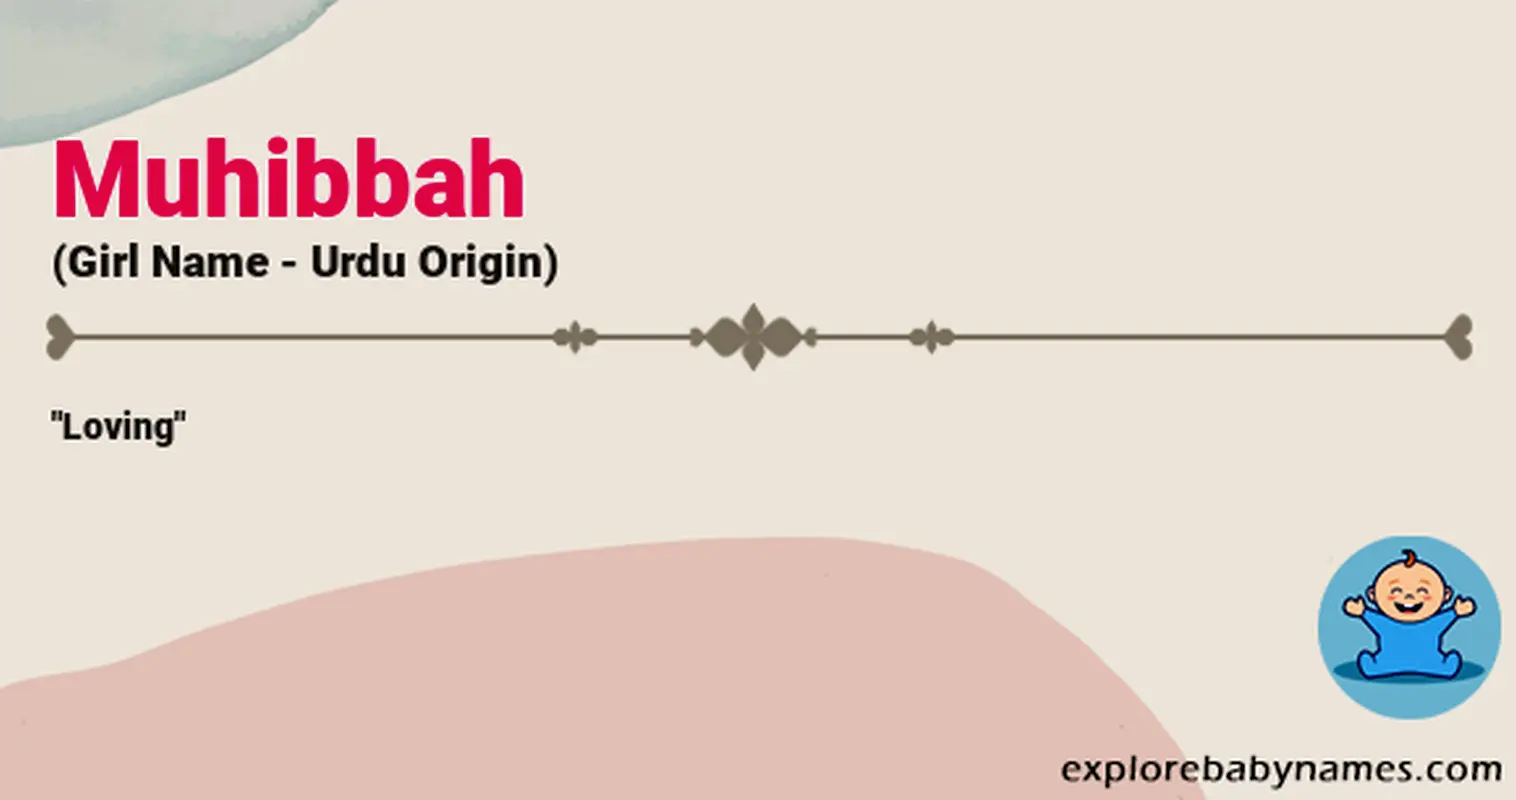 Meaning of Muhibbah